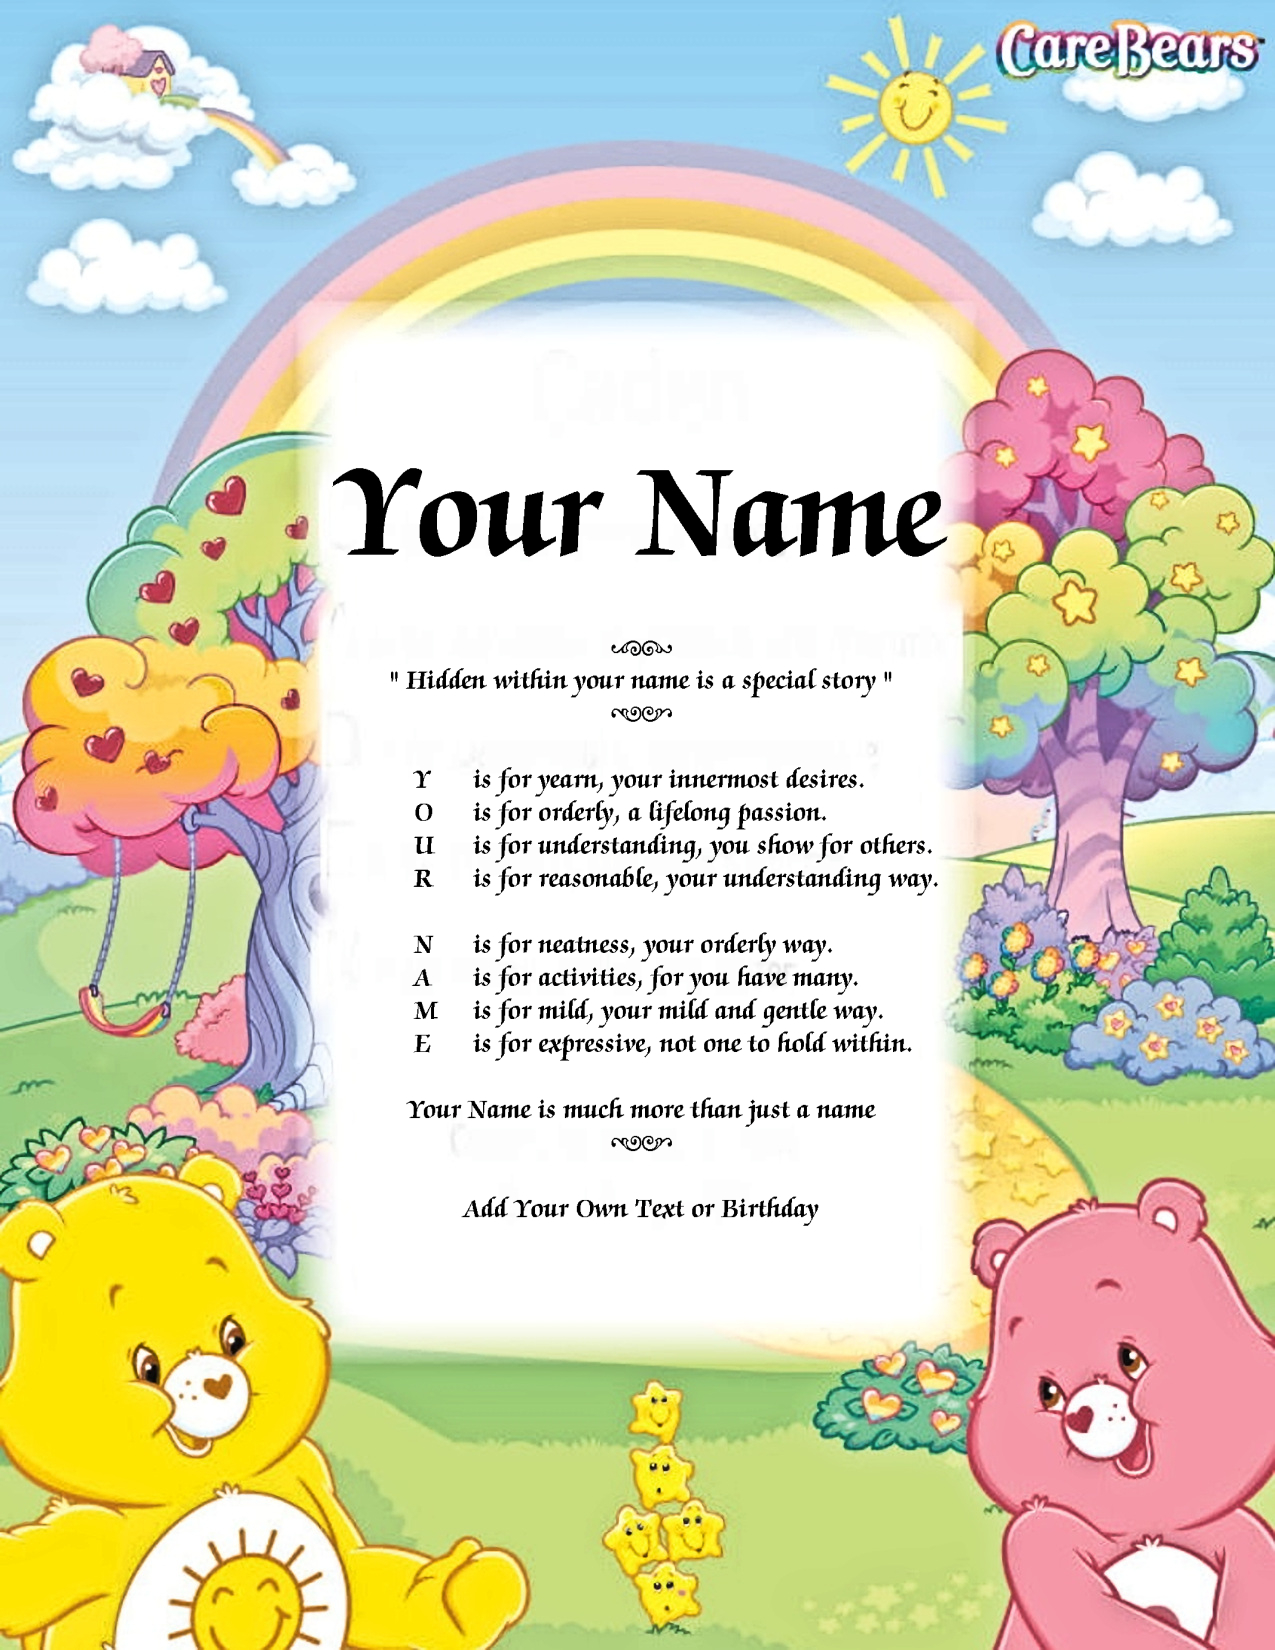 Care Bears Playground Child Name Poem Story Digital Download Version